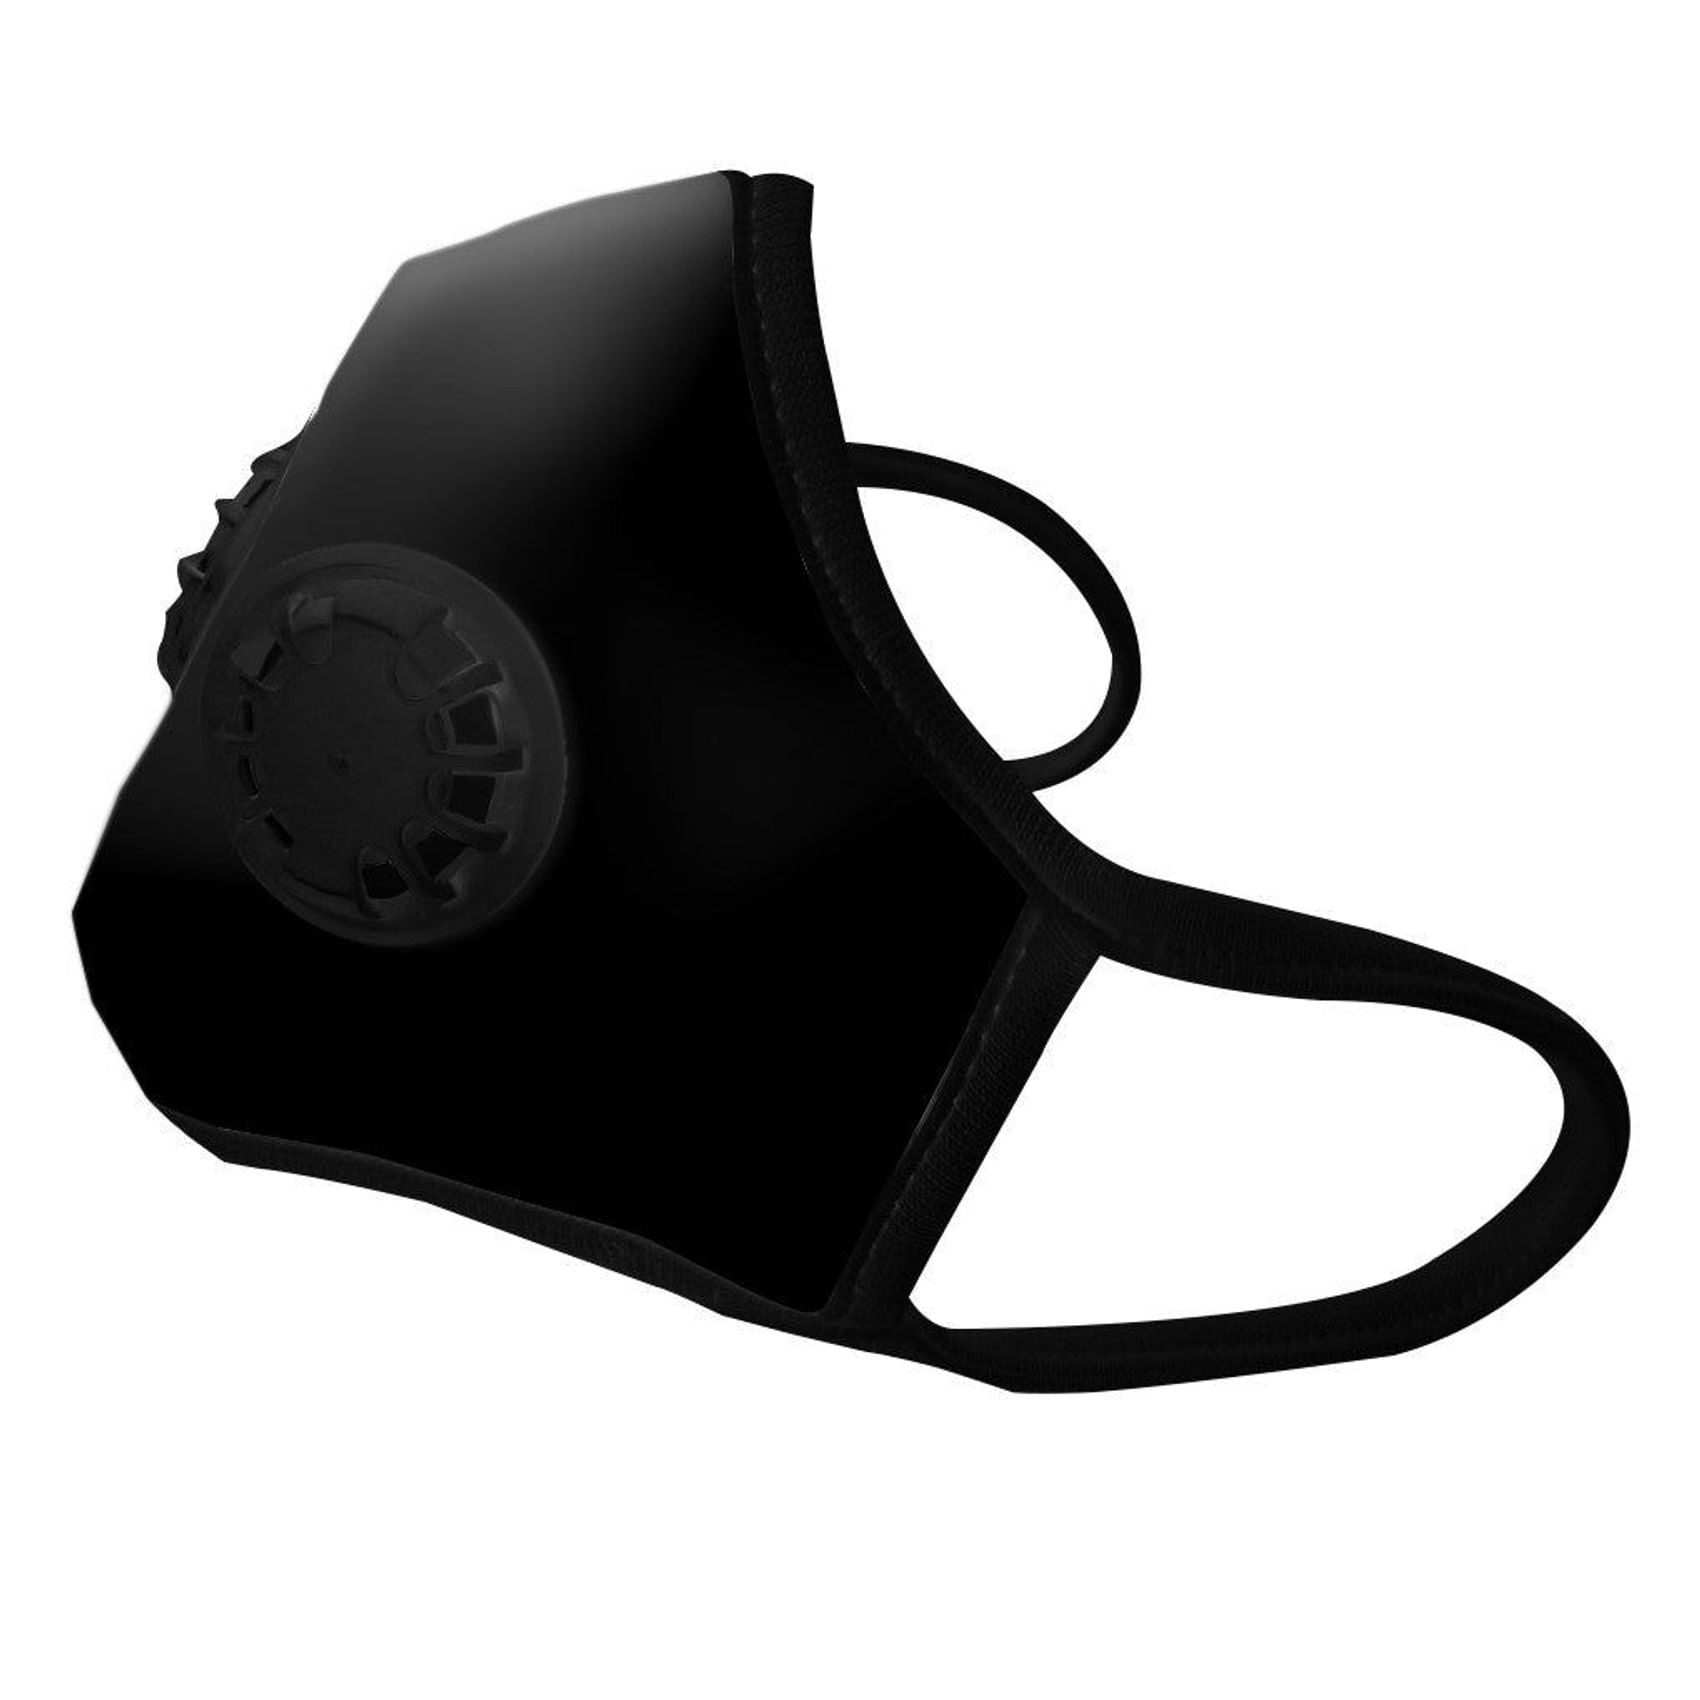 Vogmask mask with N95 filter for pollution allergies germ smoke or dust